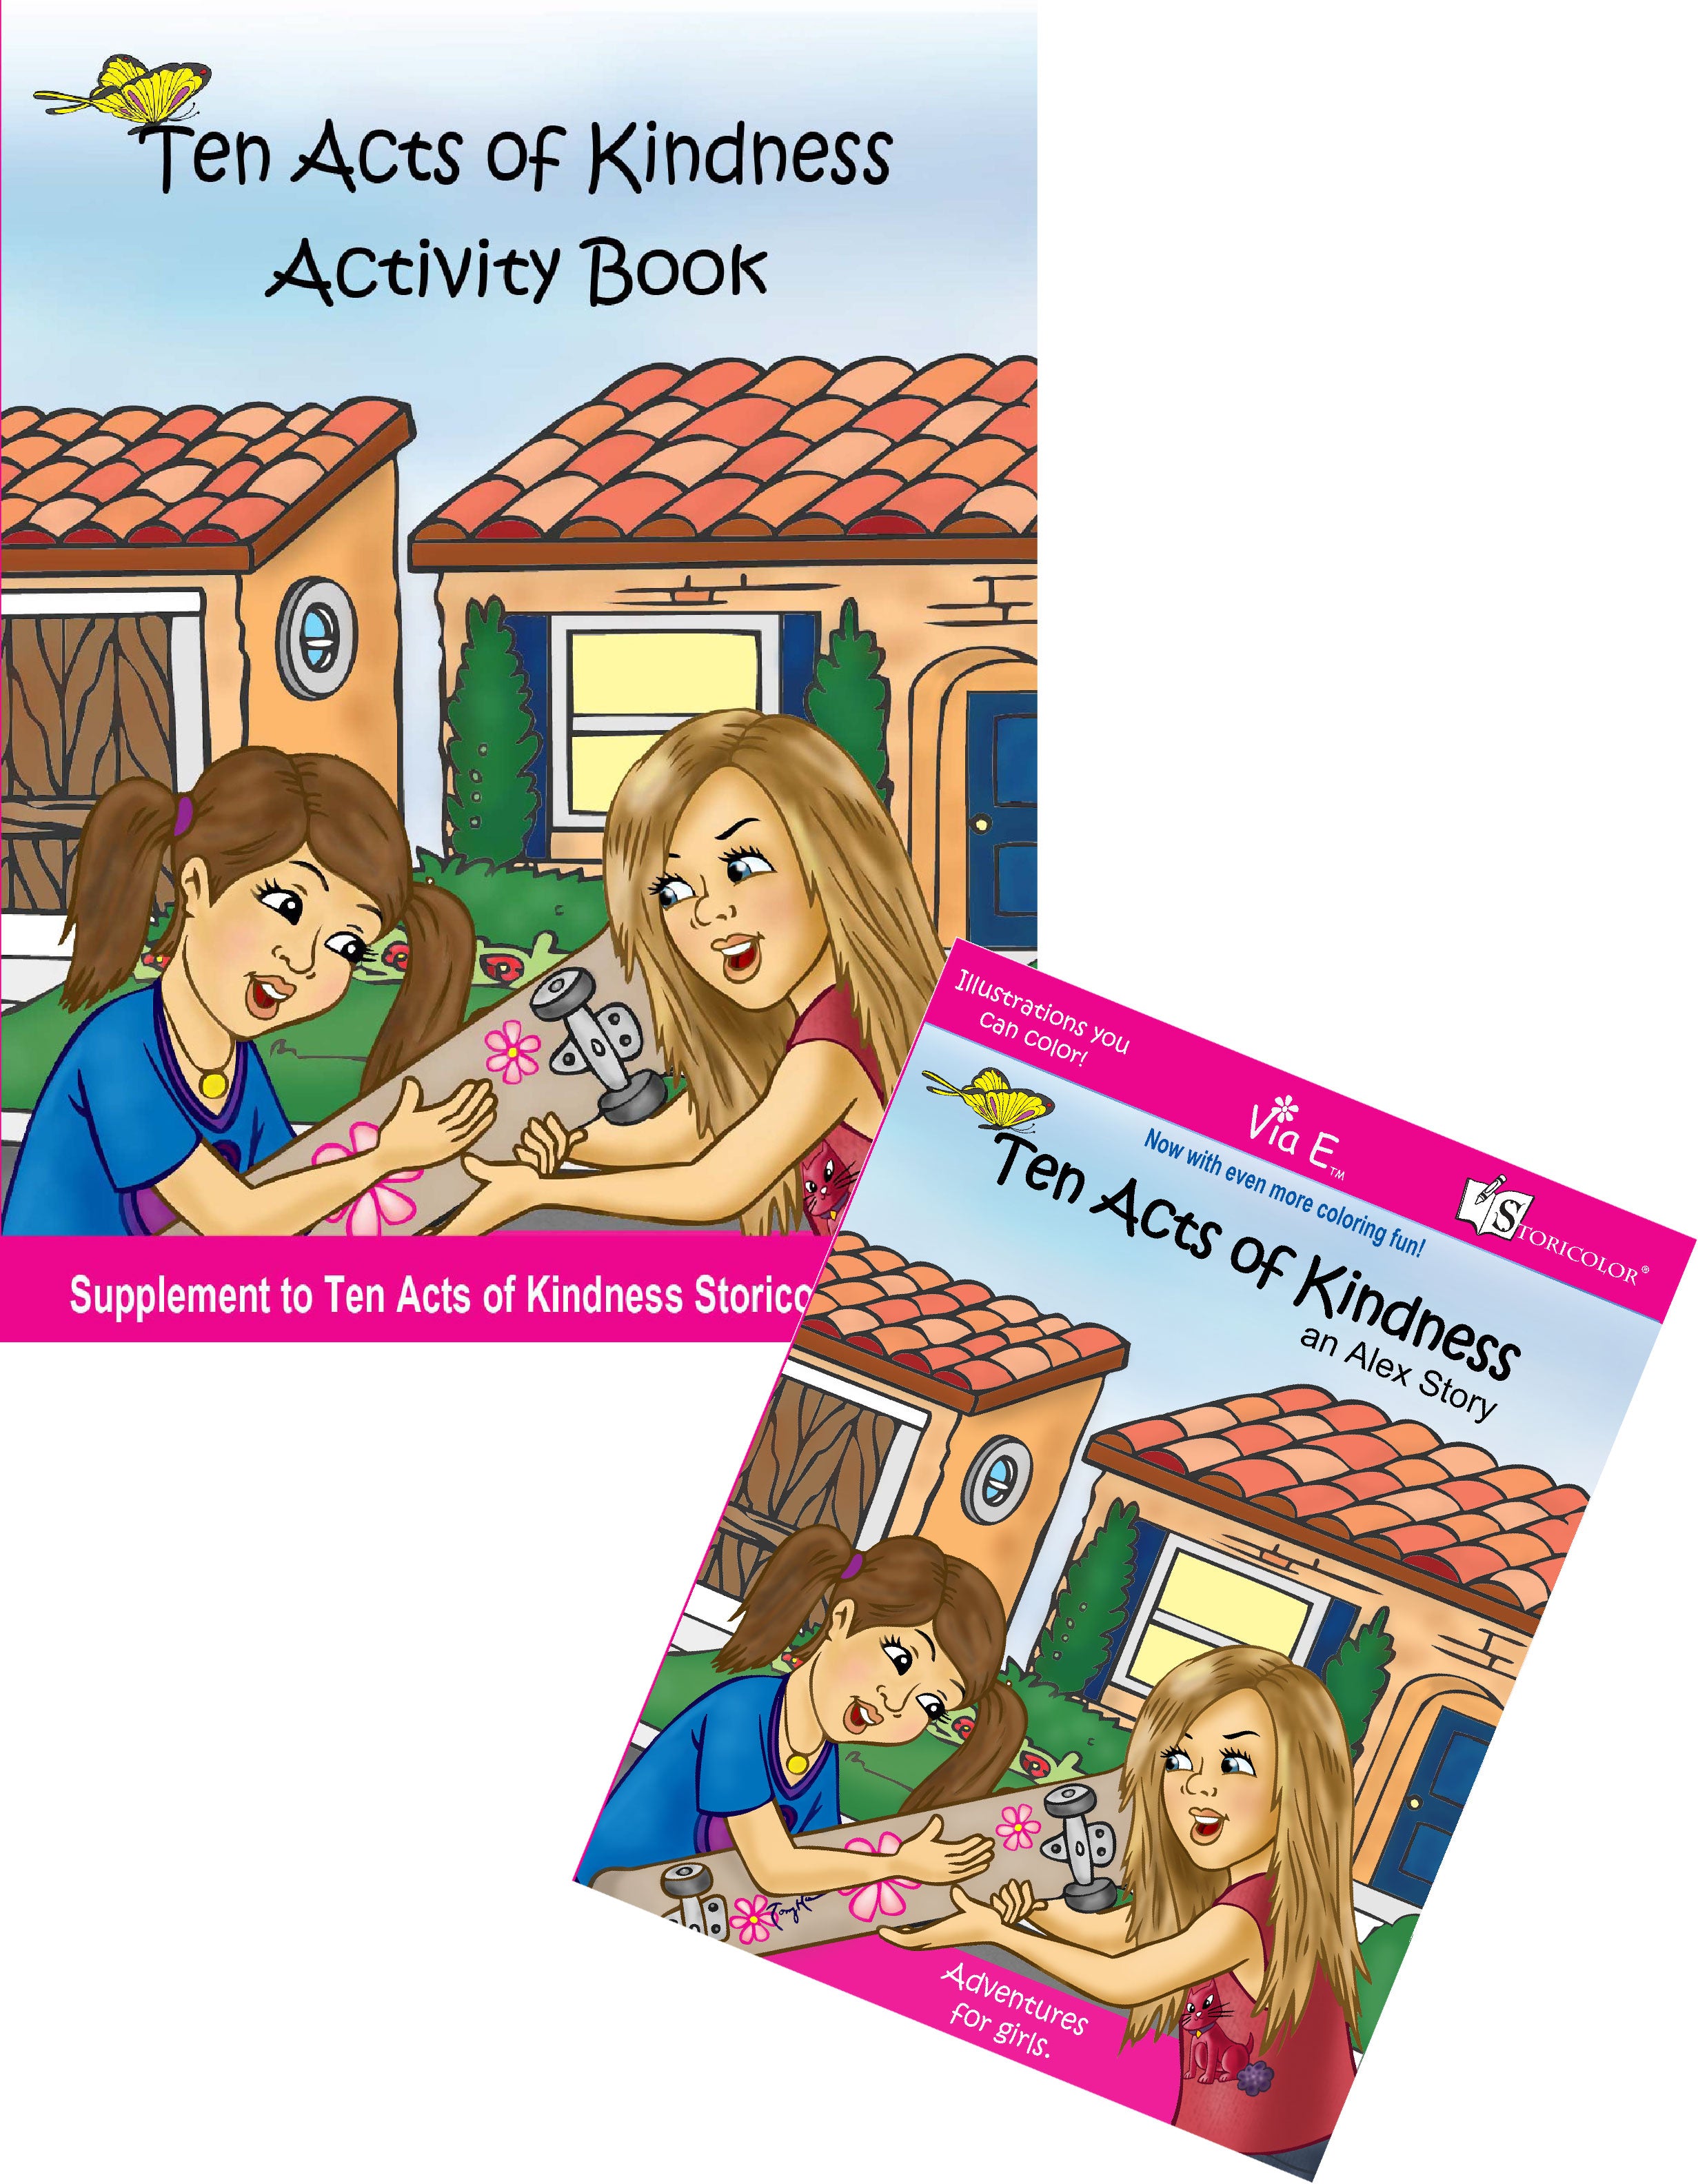 Ten Acts of Kindness Second Edition Activity Book